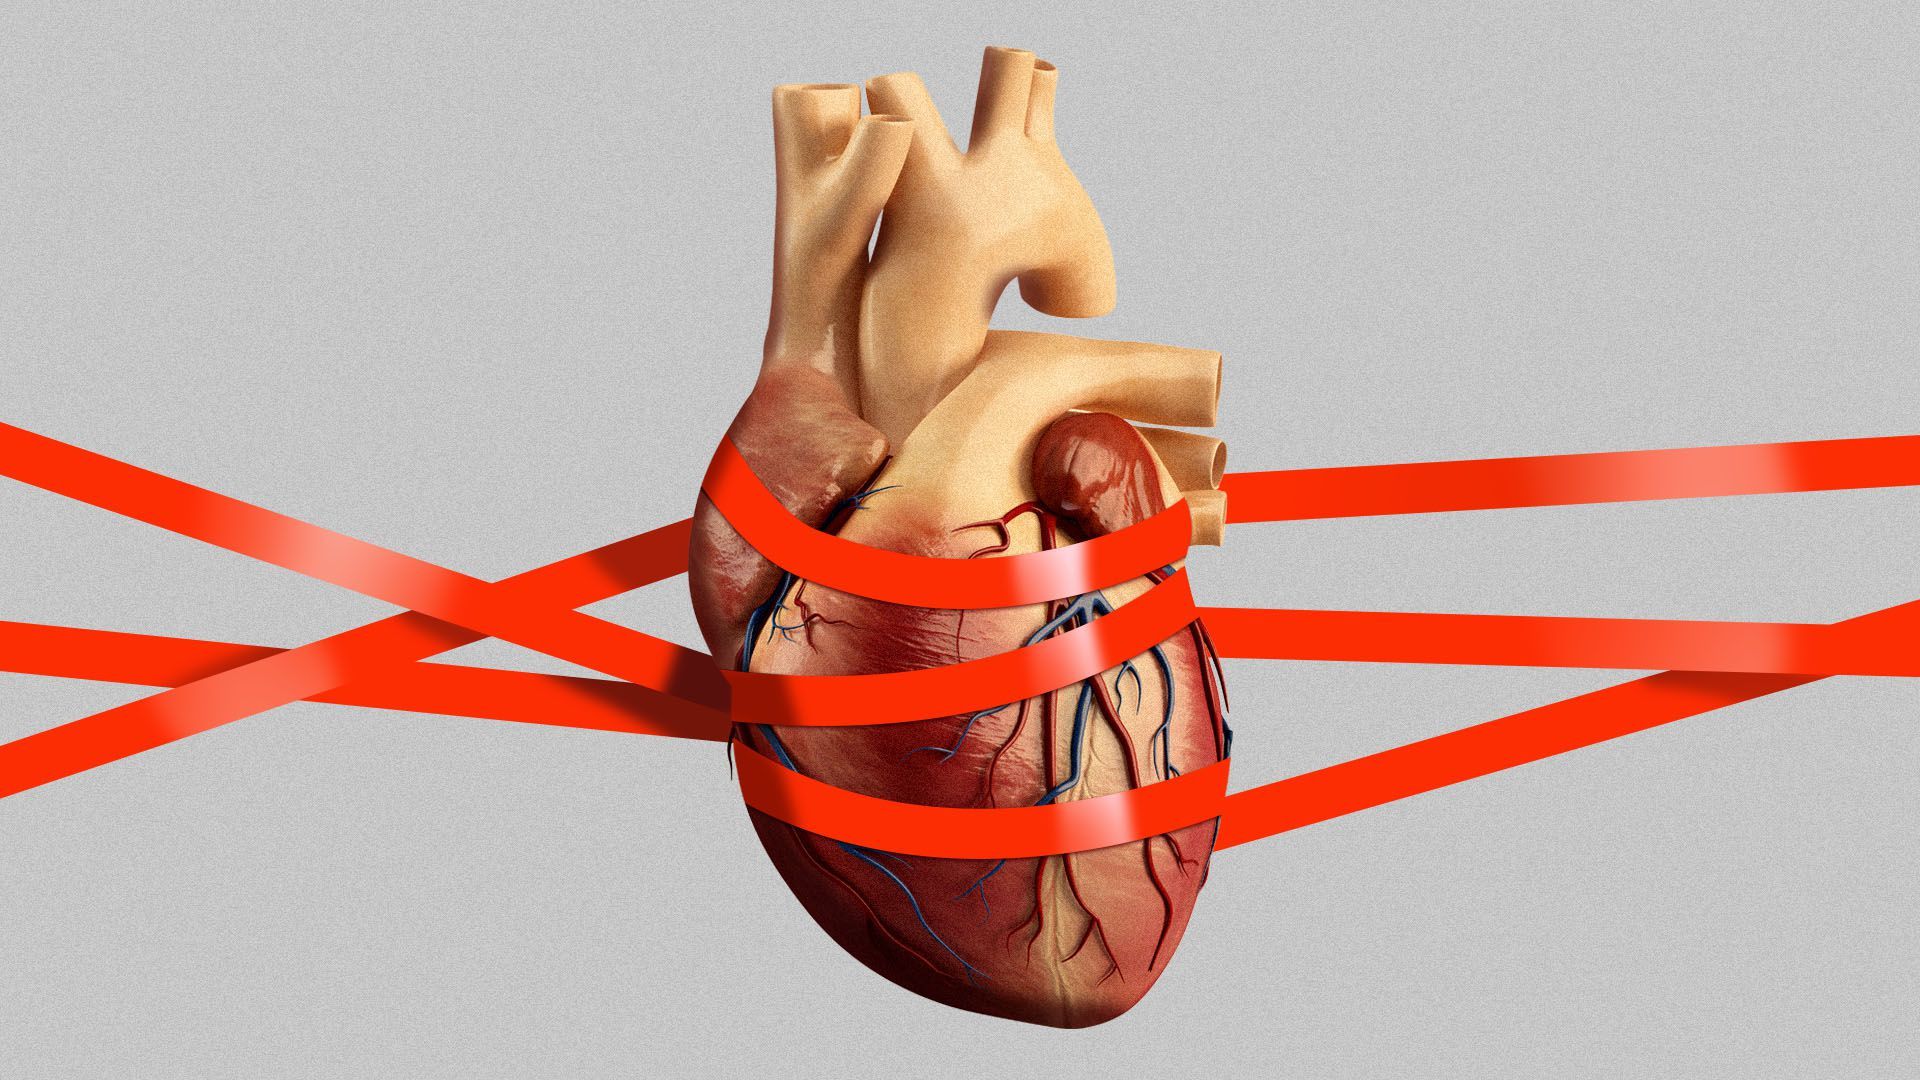 Illustration of a heart wrapped in red tape